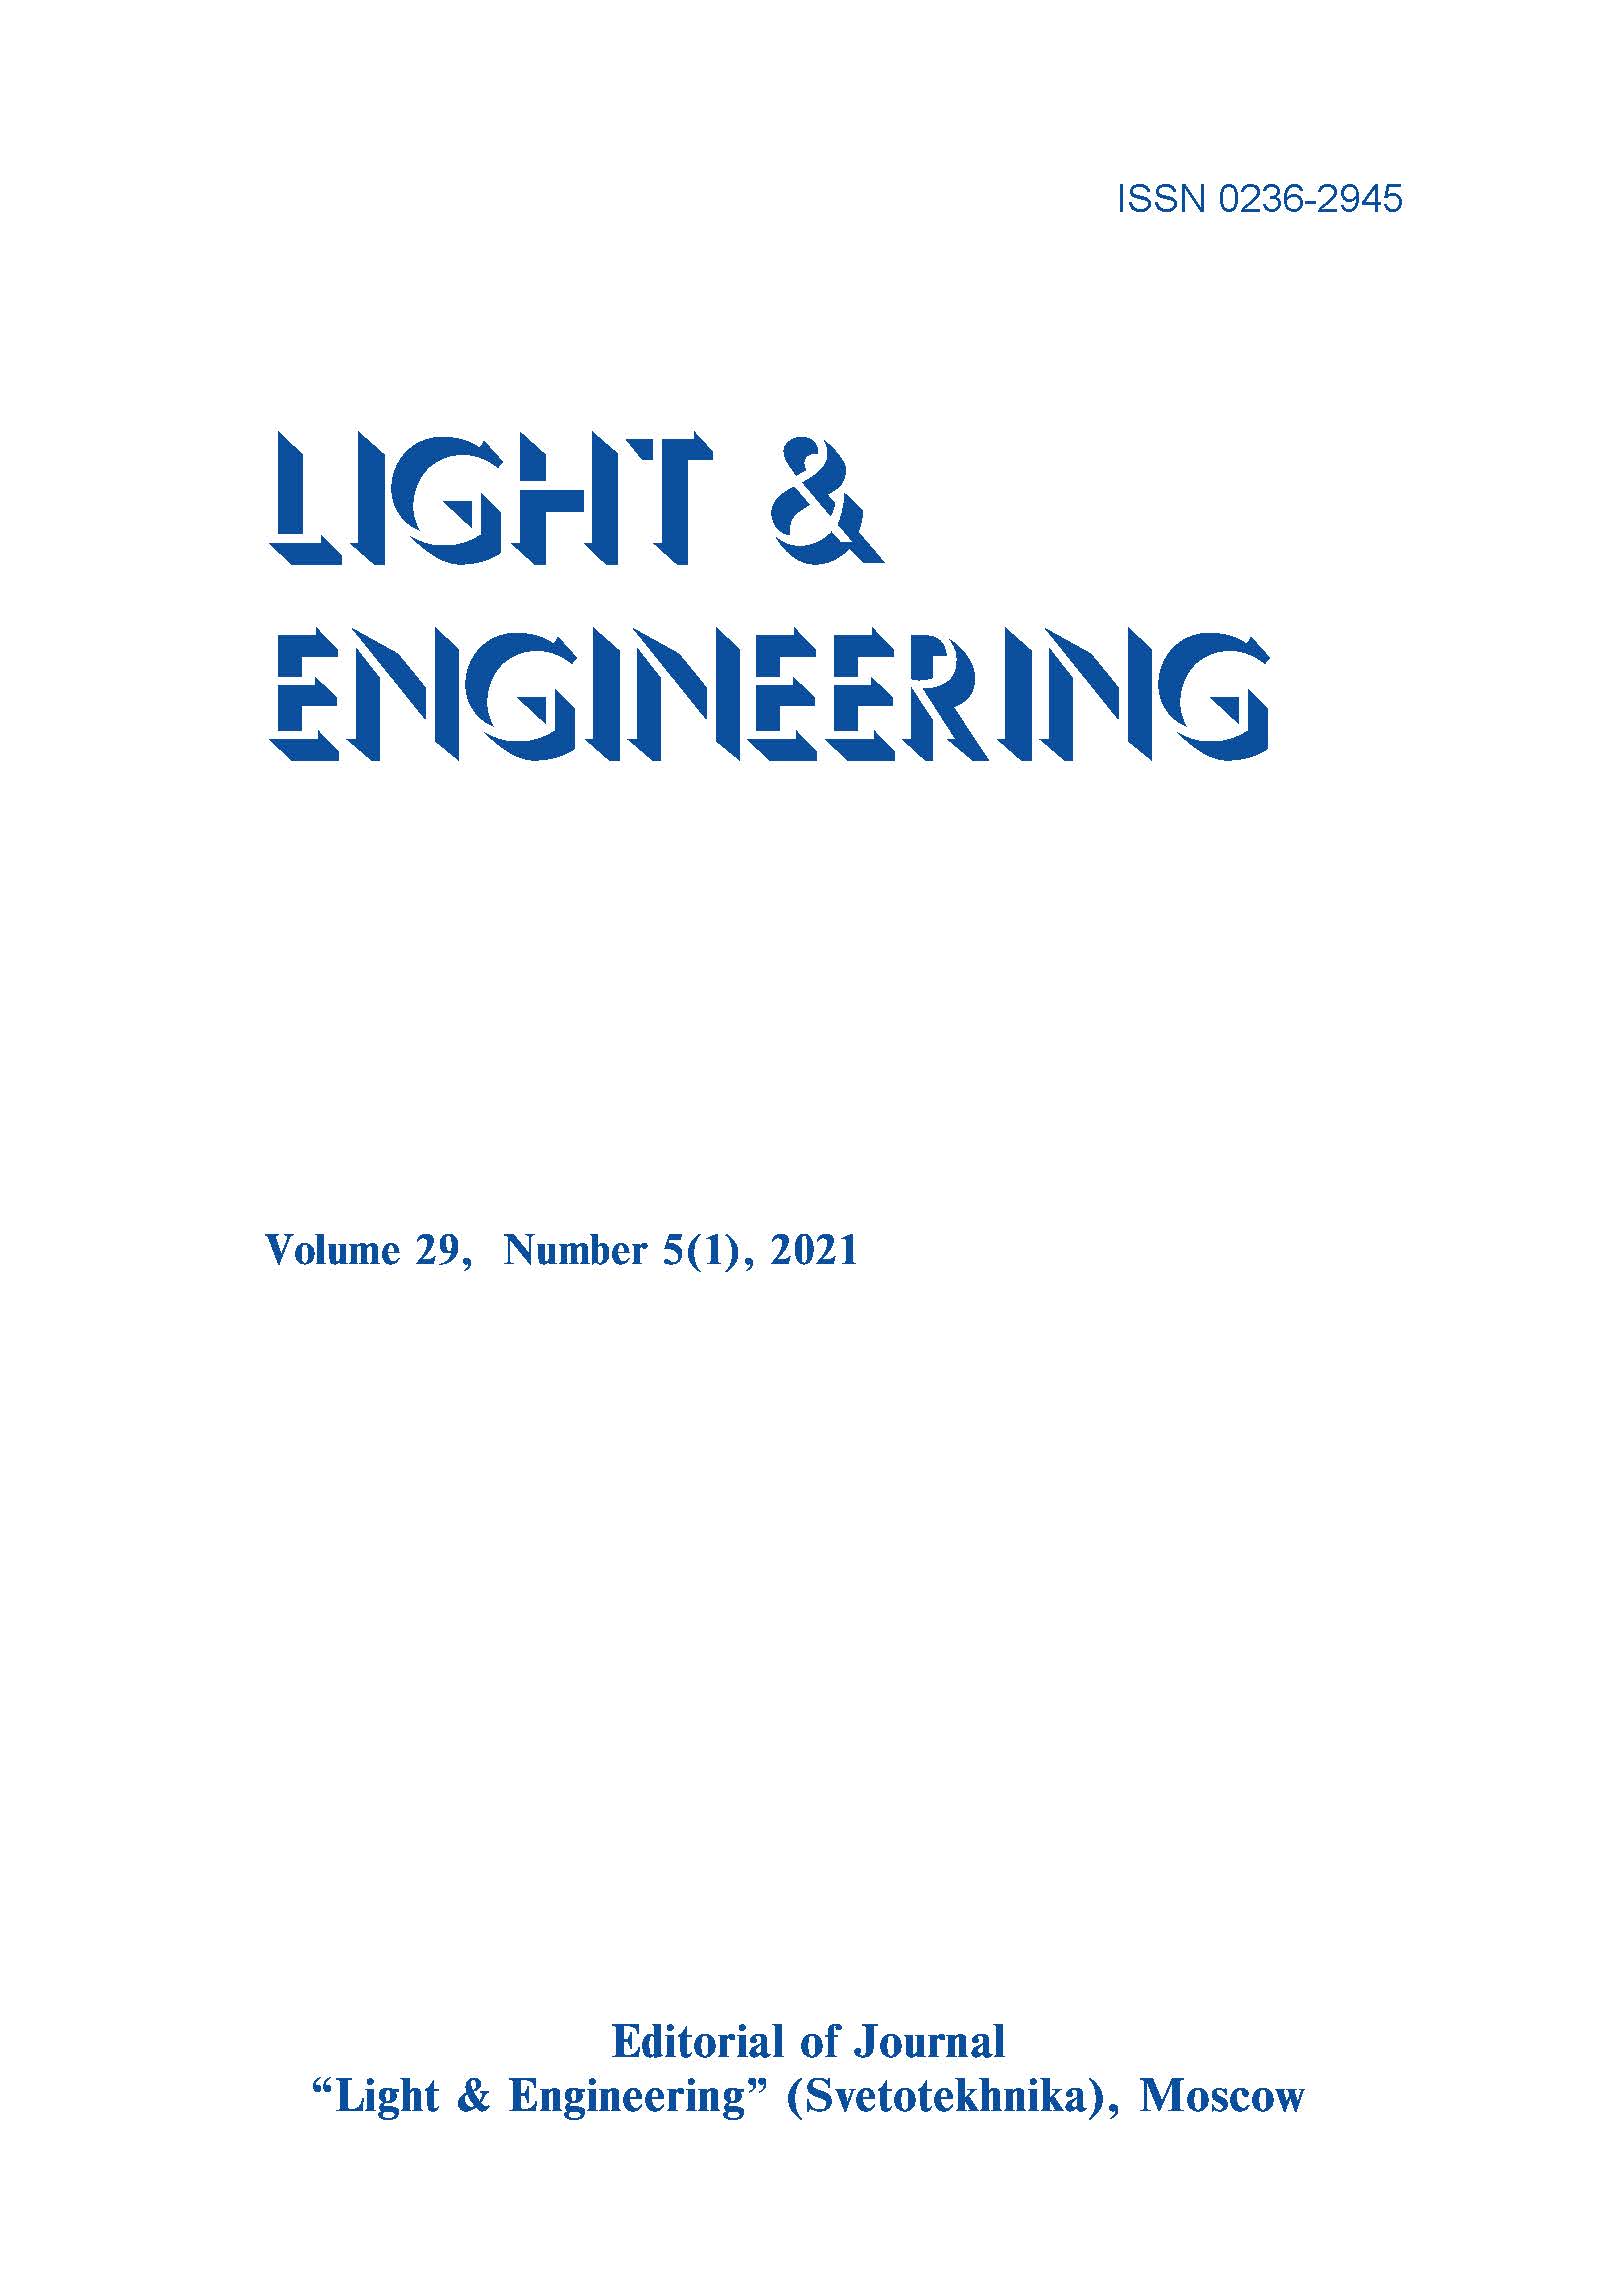 Supplementary Artificial Lighting of Interiors as a Factor to Create a Comfortable Lighting Environment in Working Premises of Office Buildings: A Review L&E, Vol. 29, No. 5 (1), 2021